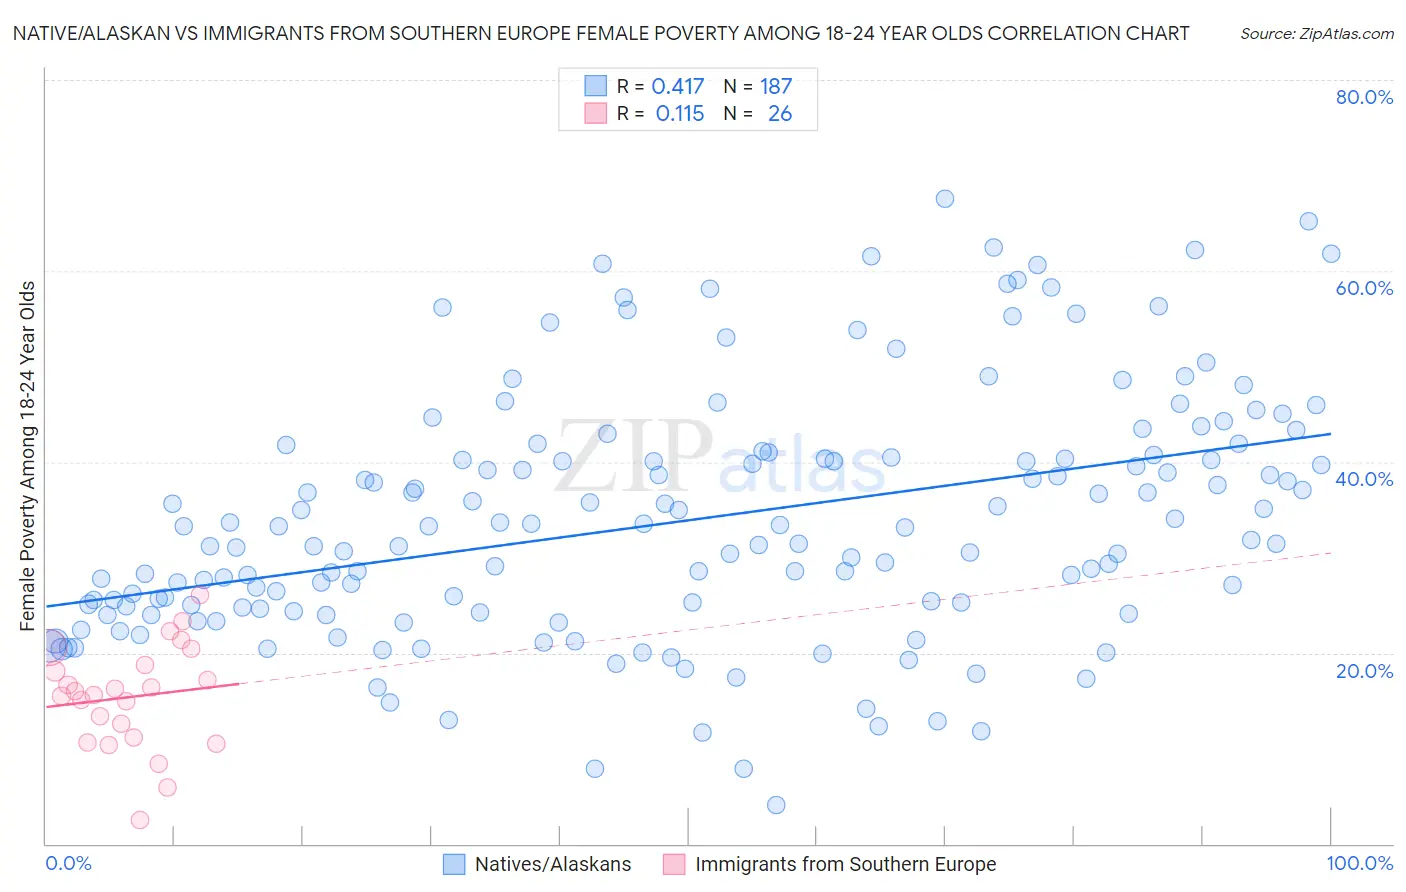 Native/Alaskan vs Immigrants from Southern Europe Female Poverty Among 18-24 Year Olds